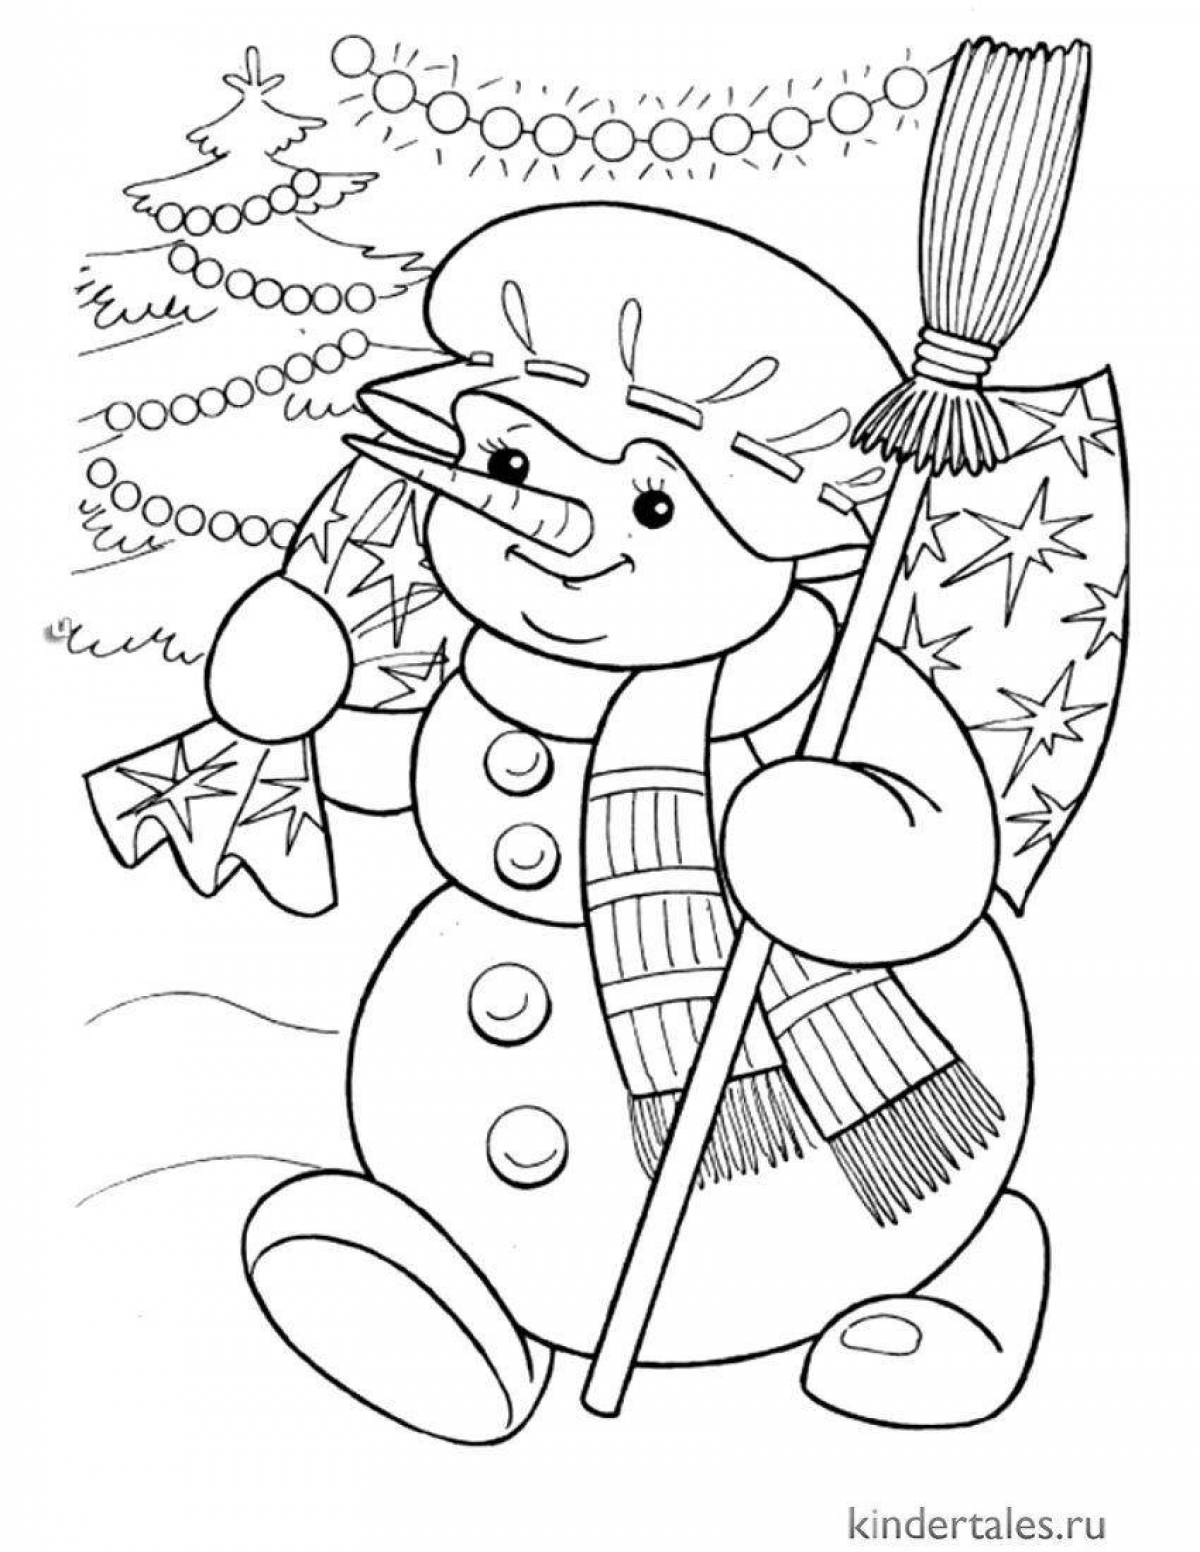 Cheerful snowman girl coloring page